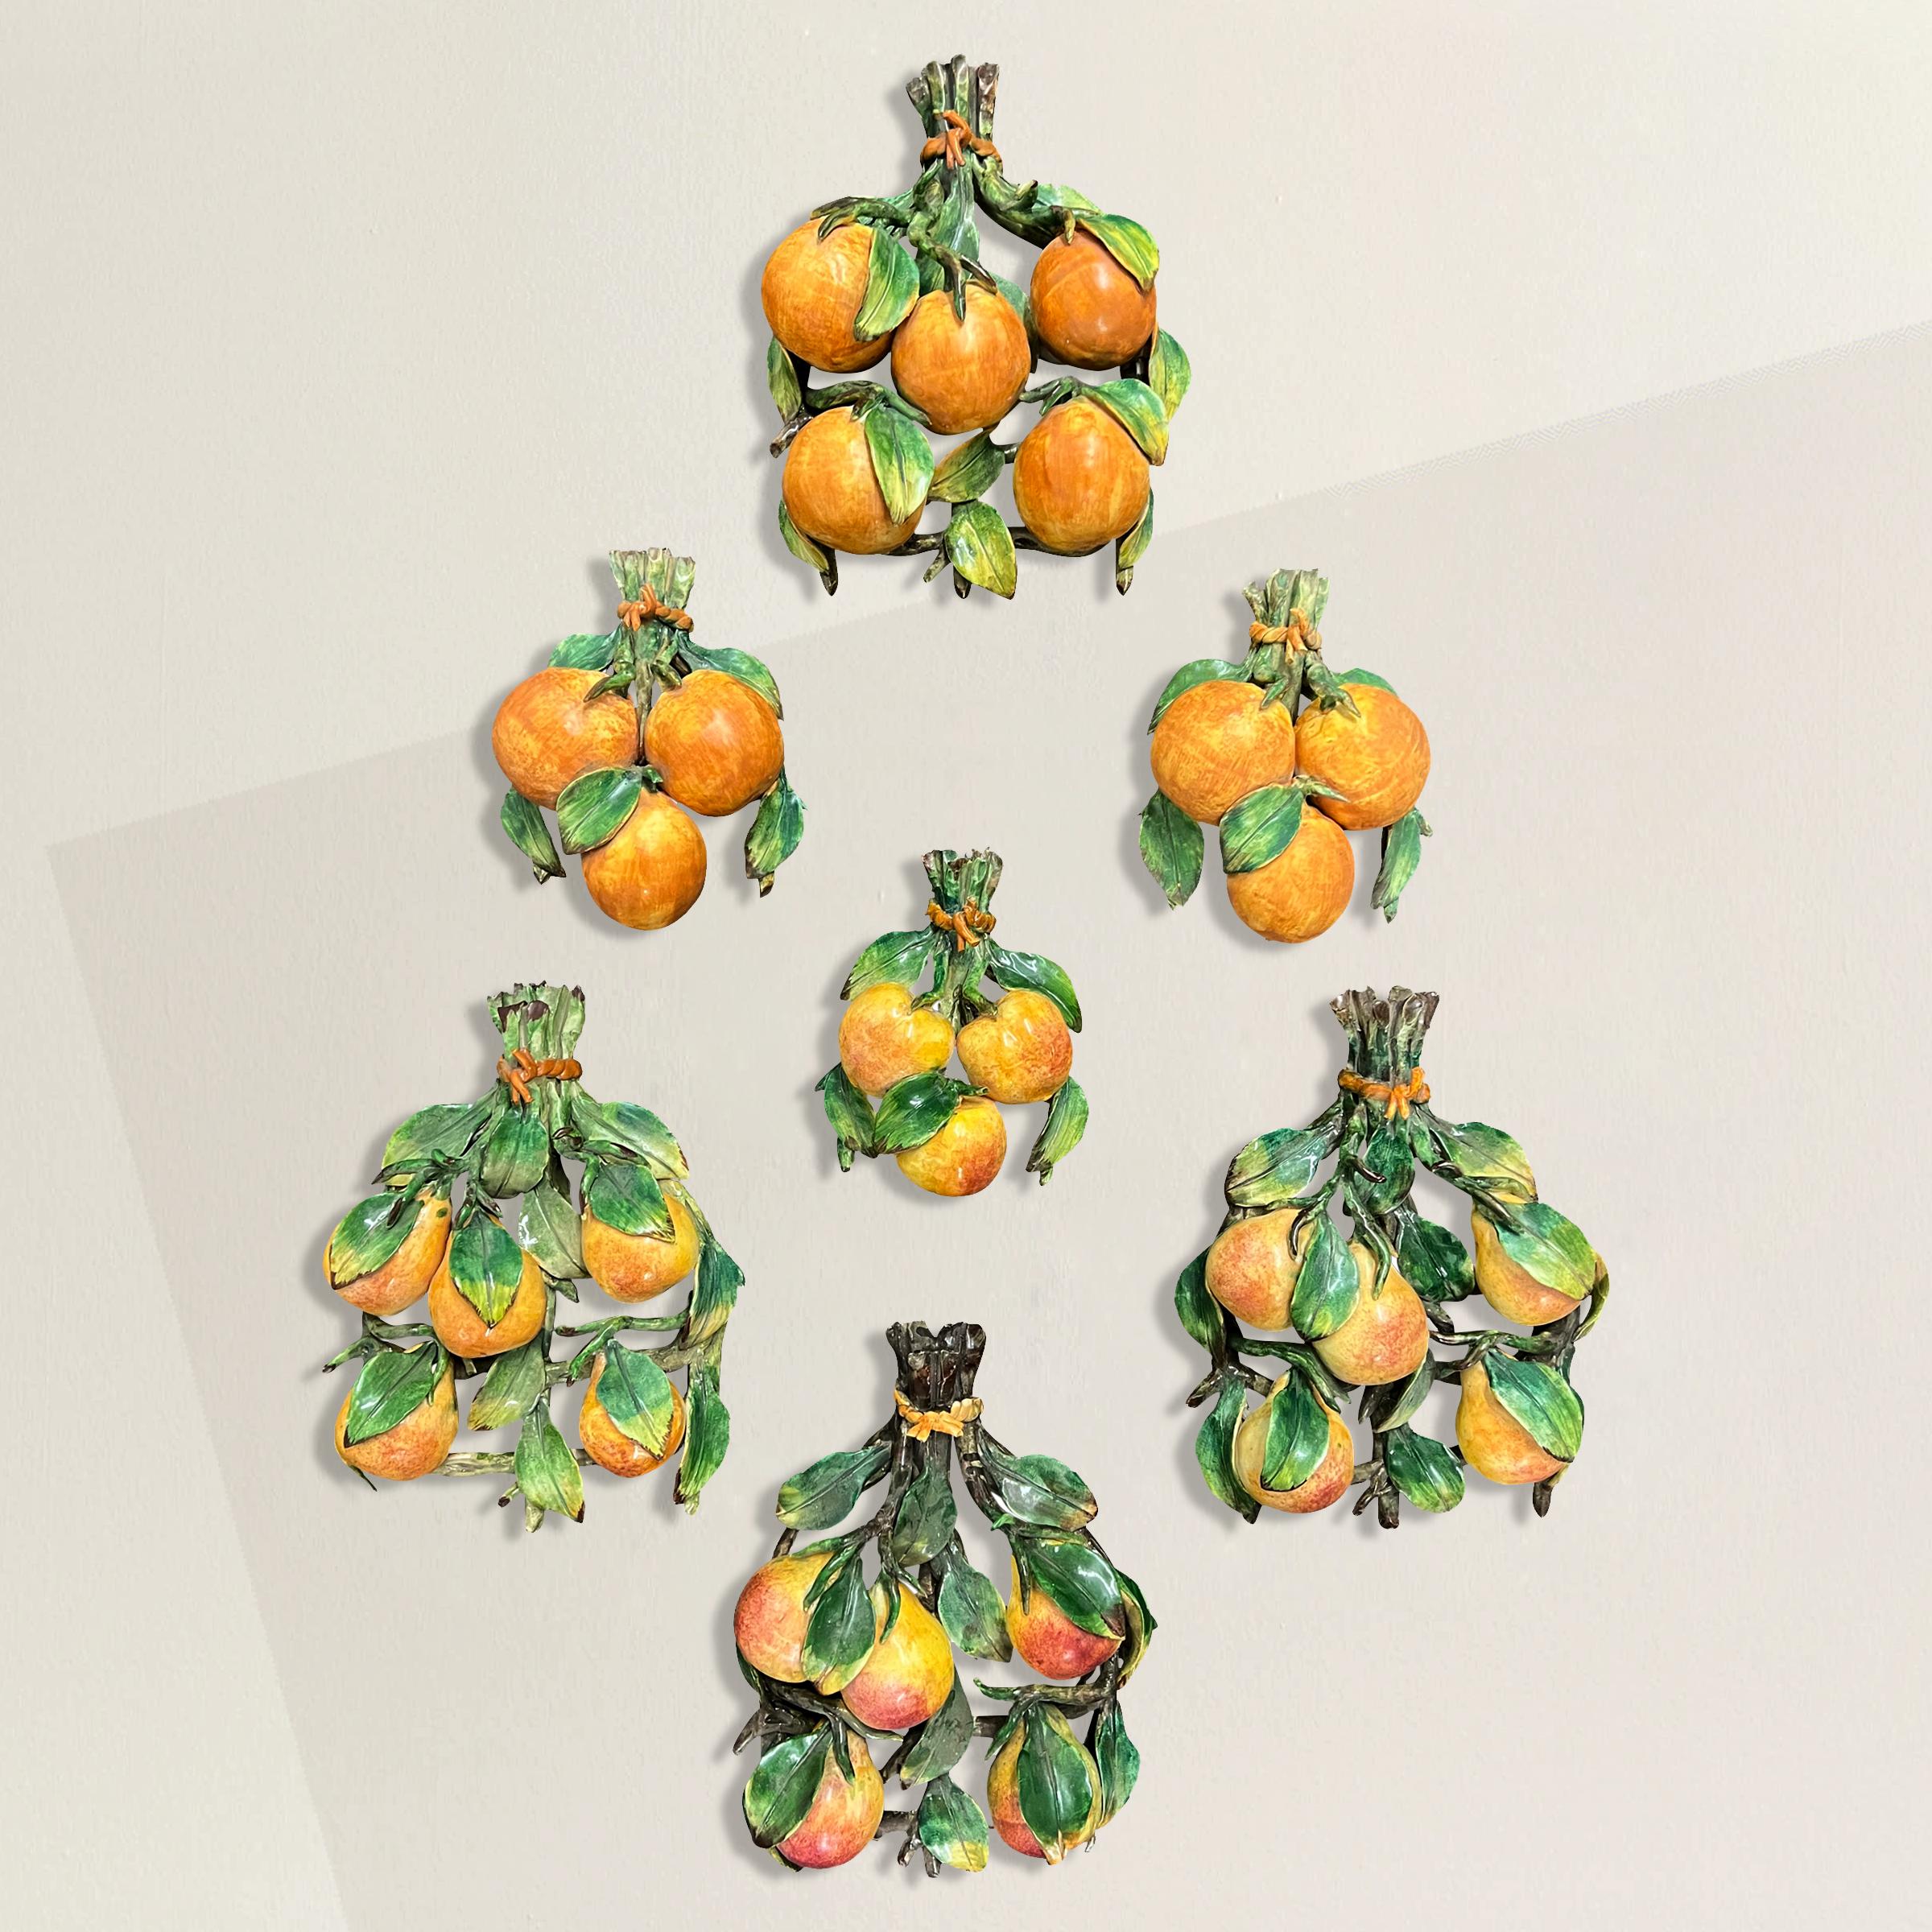 A wonderfully whimsical collection of vintage Italian Capodimonte hand-painted porcelain fruits including oranges, pears, and apples, perfect for hanging in myriad arrangements in the kitchen of your country house.